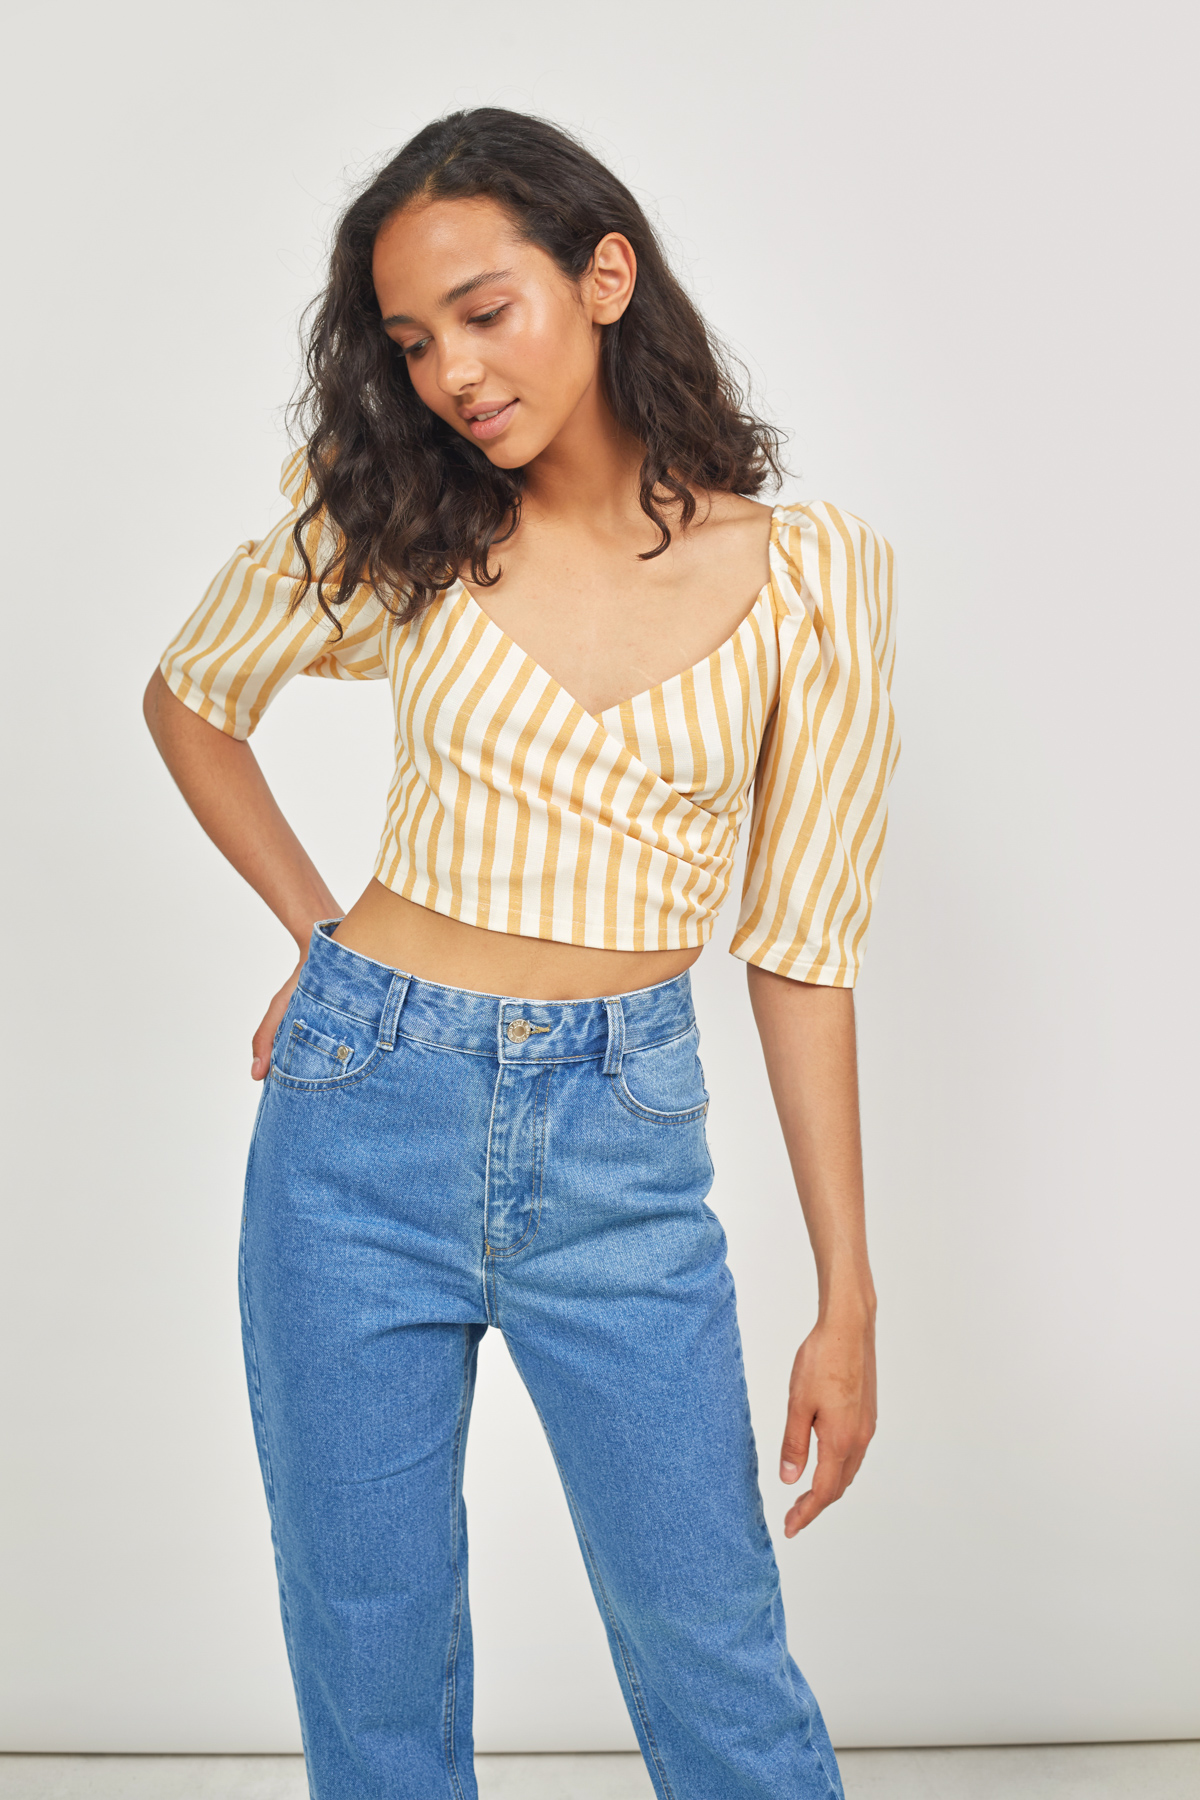 Crop top in yellow stripes, photo 1